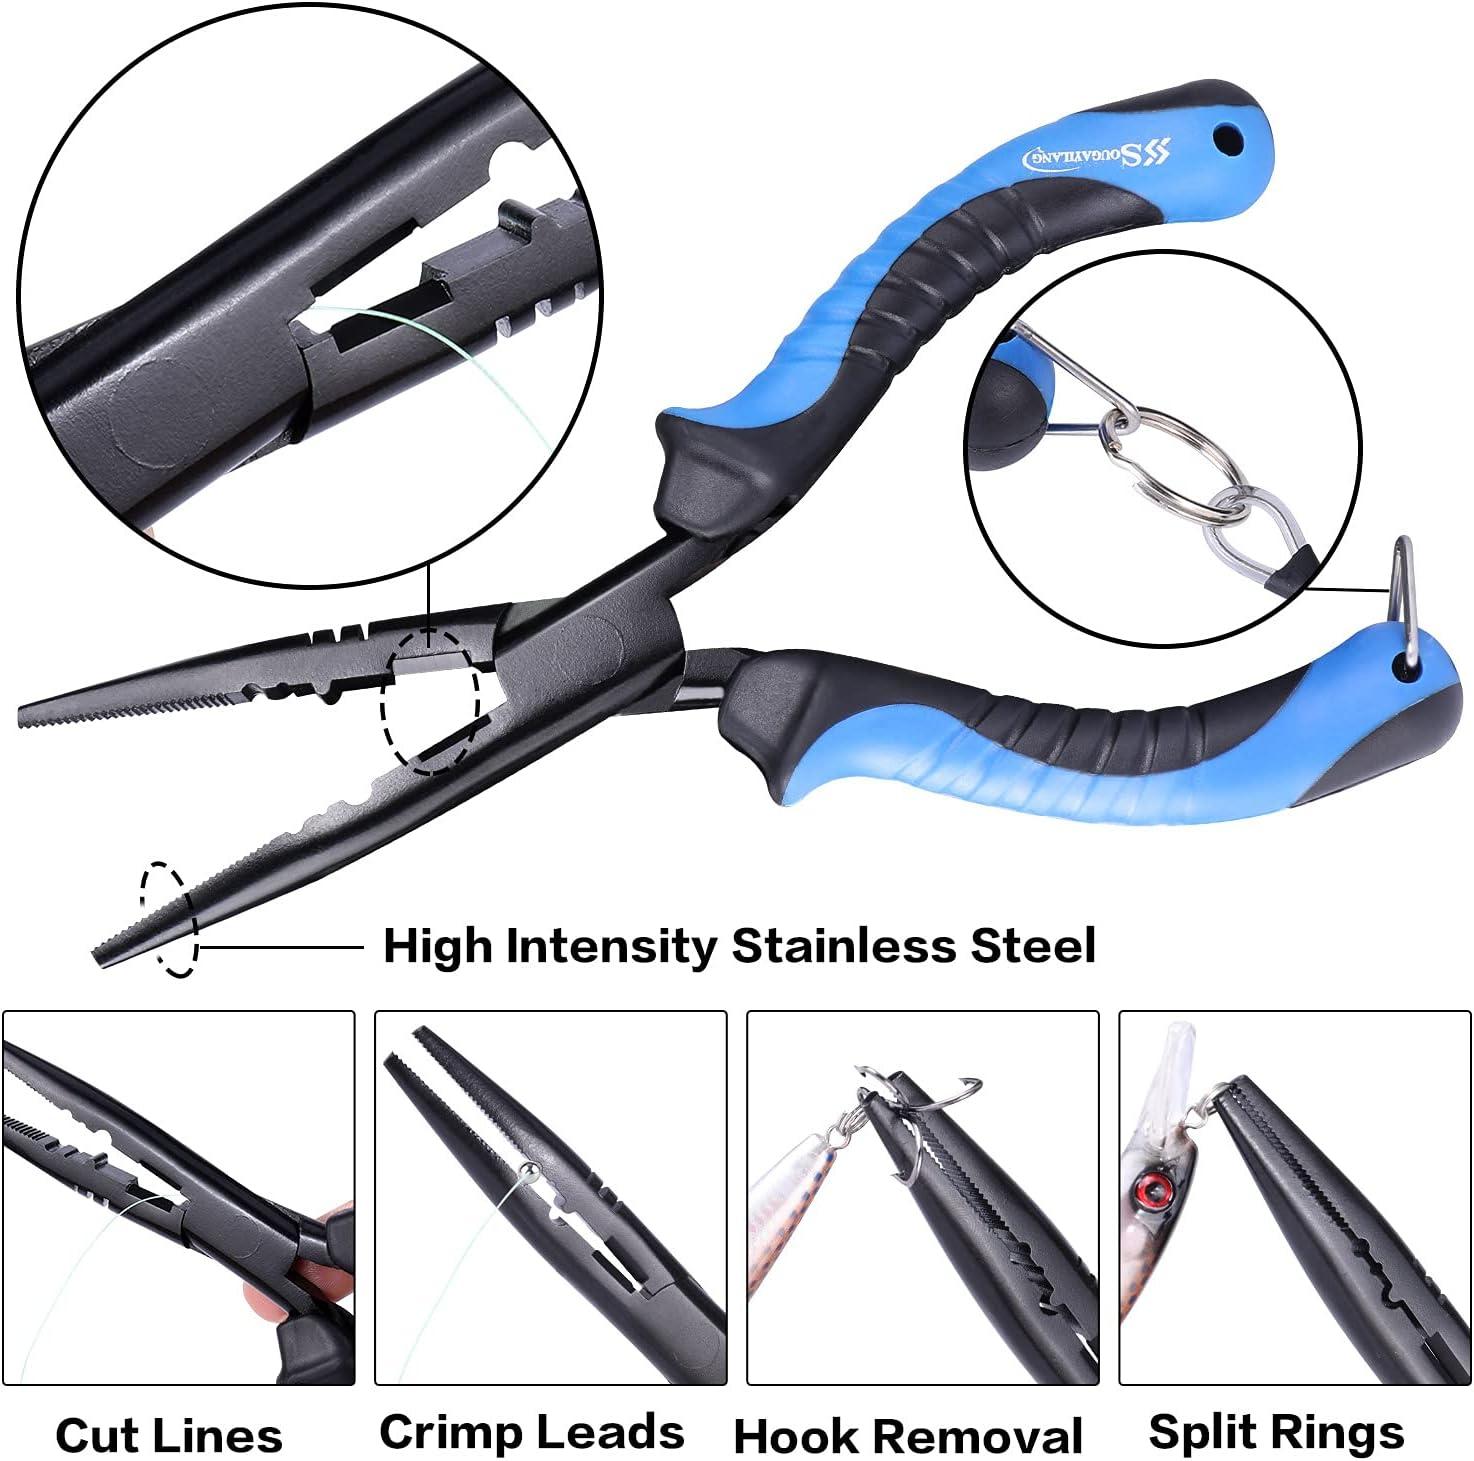 Sougayilang Fishing Pliers 4pcs Tools Set Combos with Steel Pliers,Floating  Lip Grip,Sharp Fillet Fishing Knife,Multi-Function Fishing Tools,Fishing  Gear with Gift Box Fishing Pliers Set